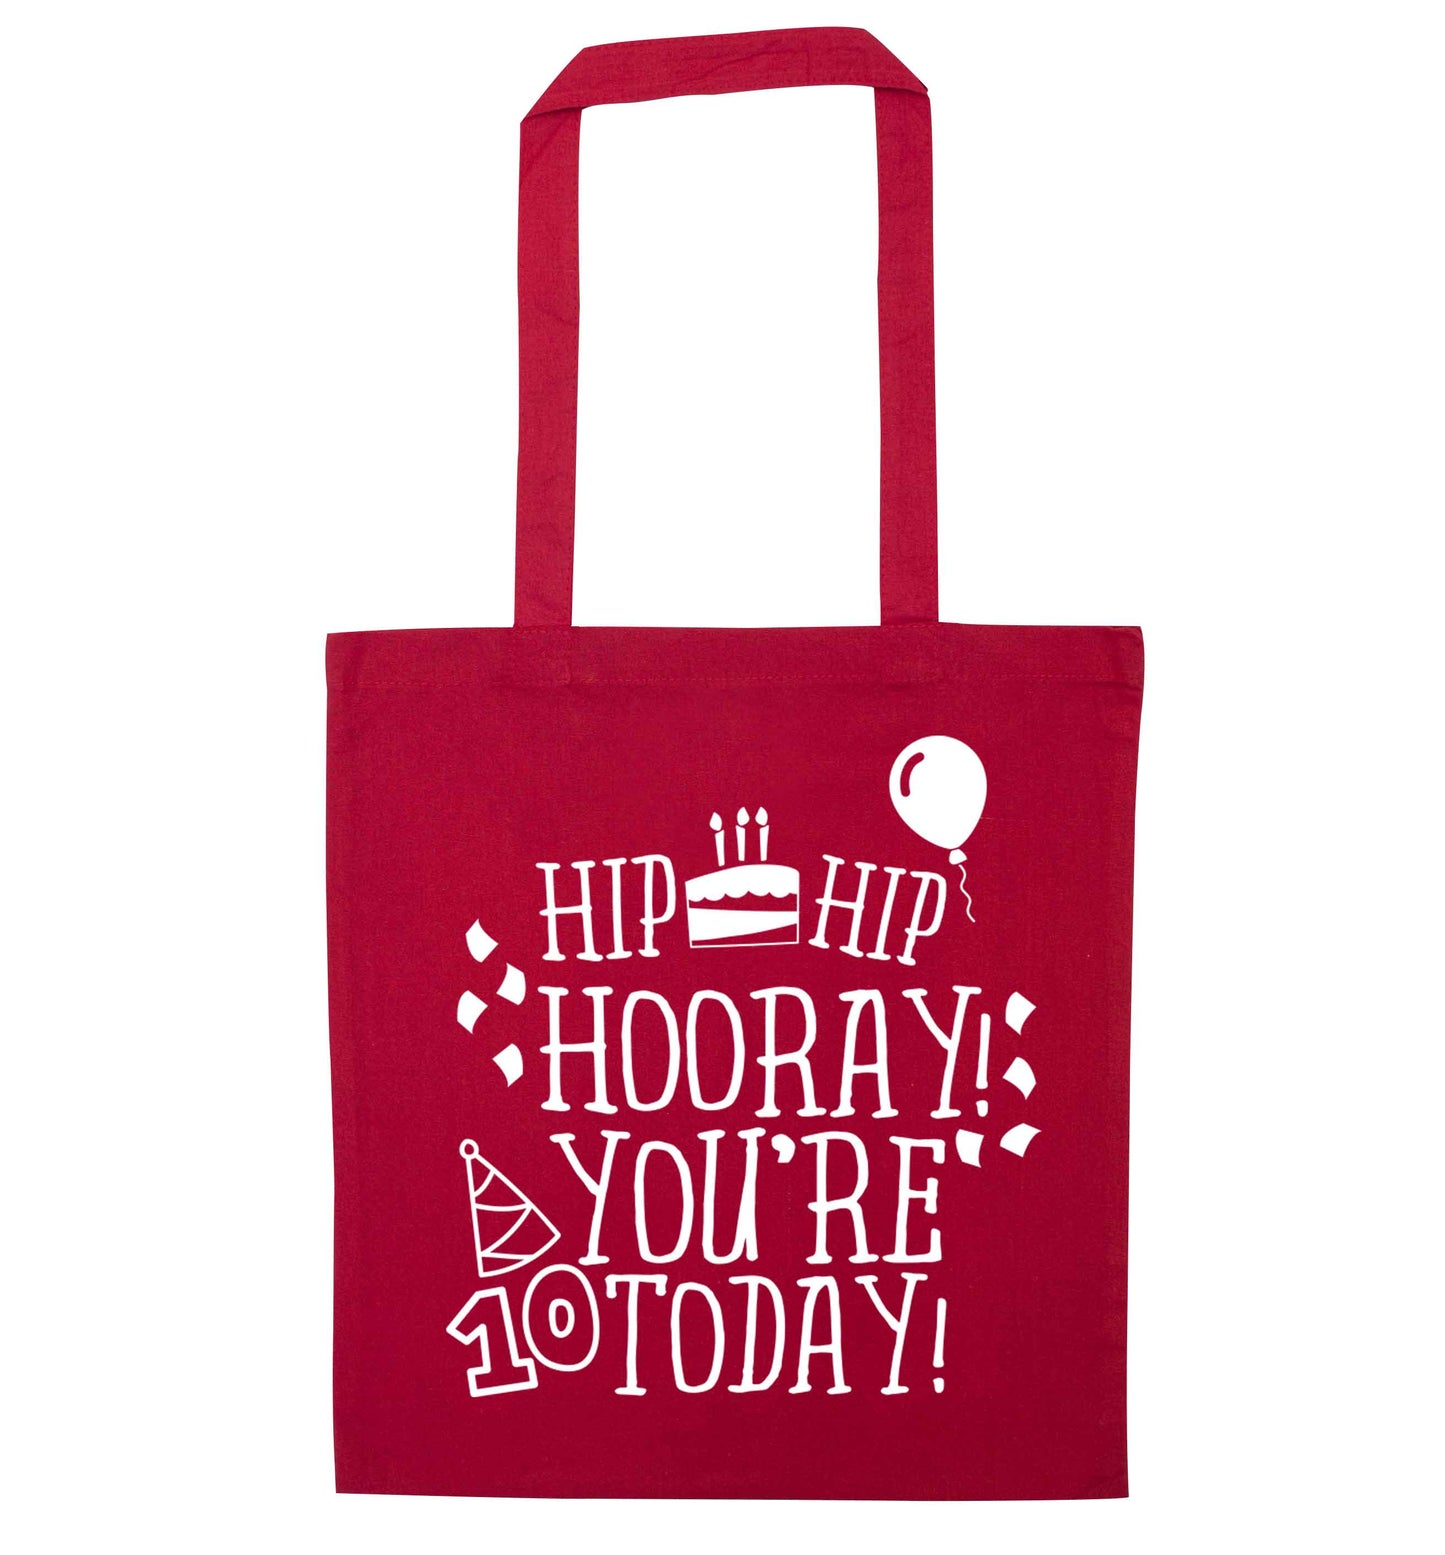 Hip hip hooray you're ten today! red tote bag